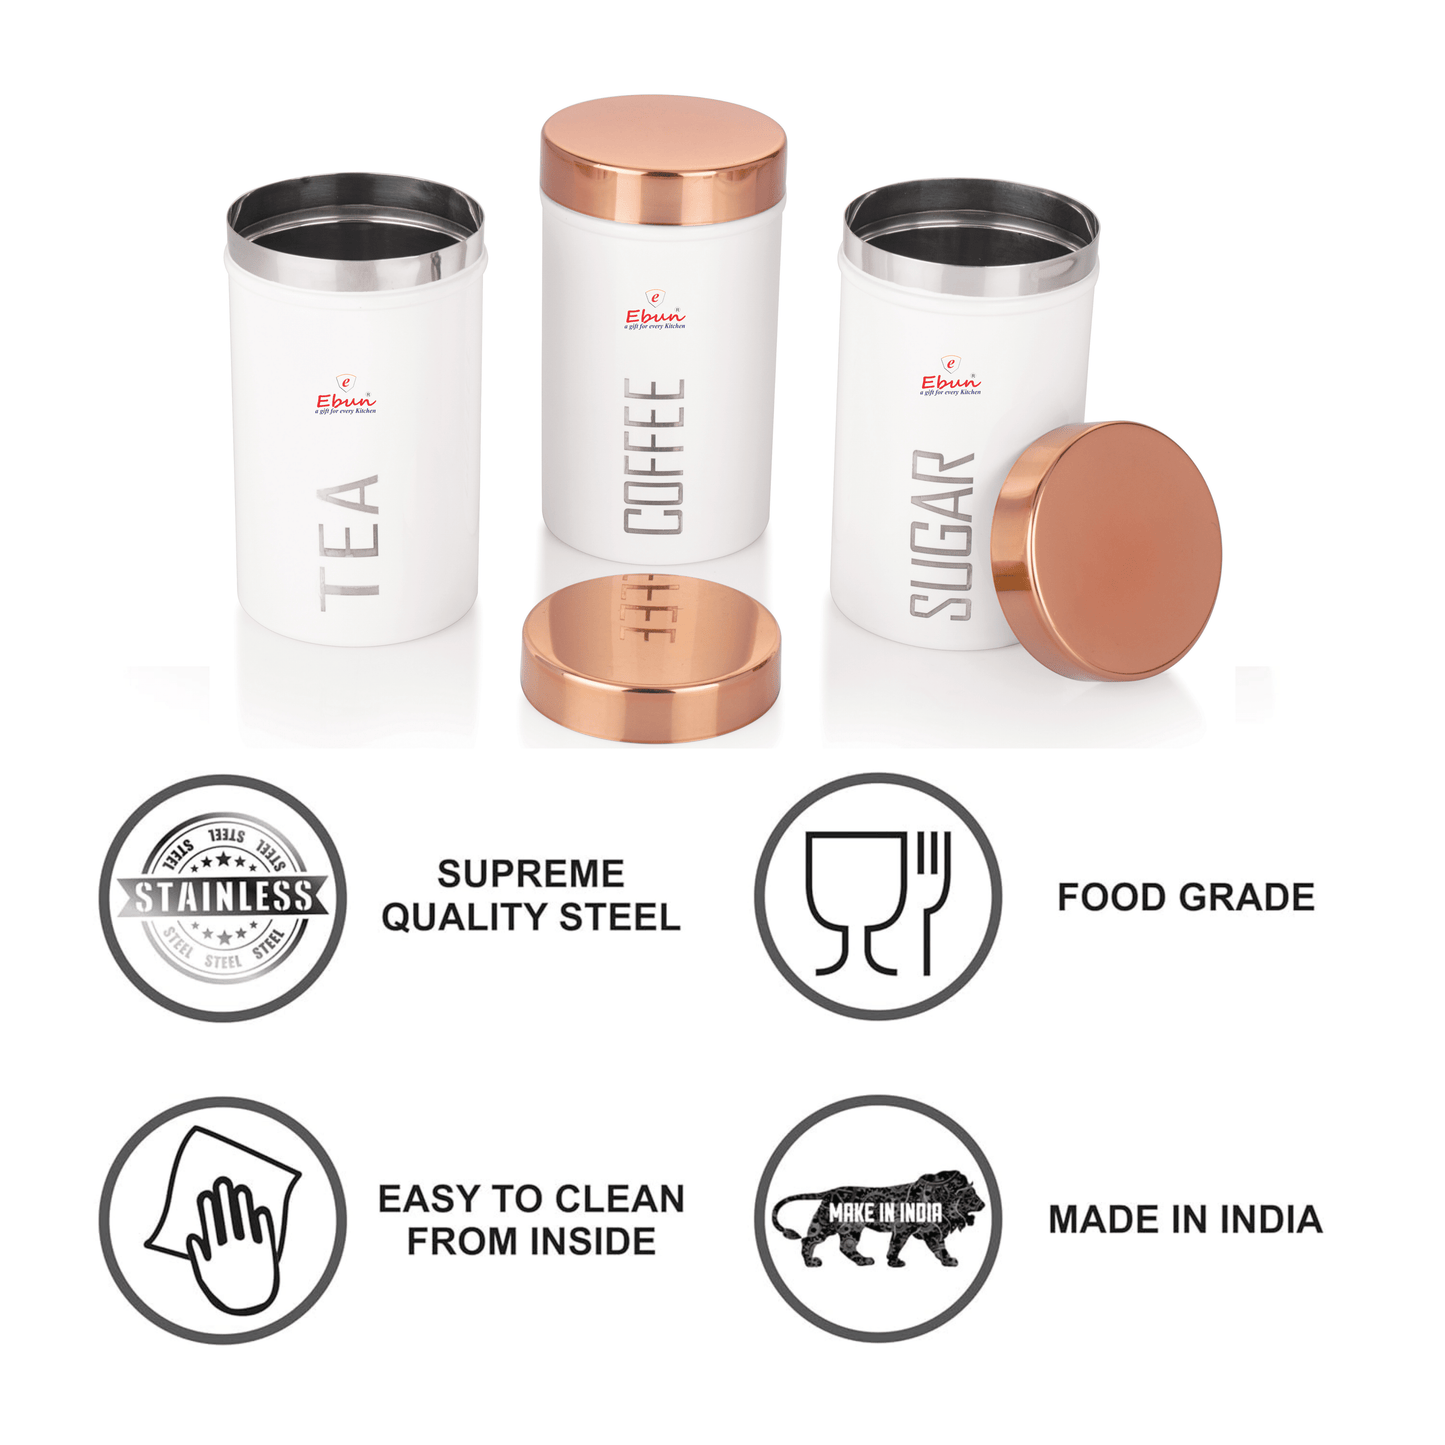 Ebun Stainless Steel Tea Sugar Coffee Containers Set of 3 with the Capacity of 500 Gms Each